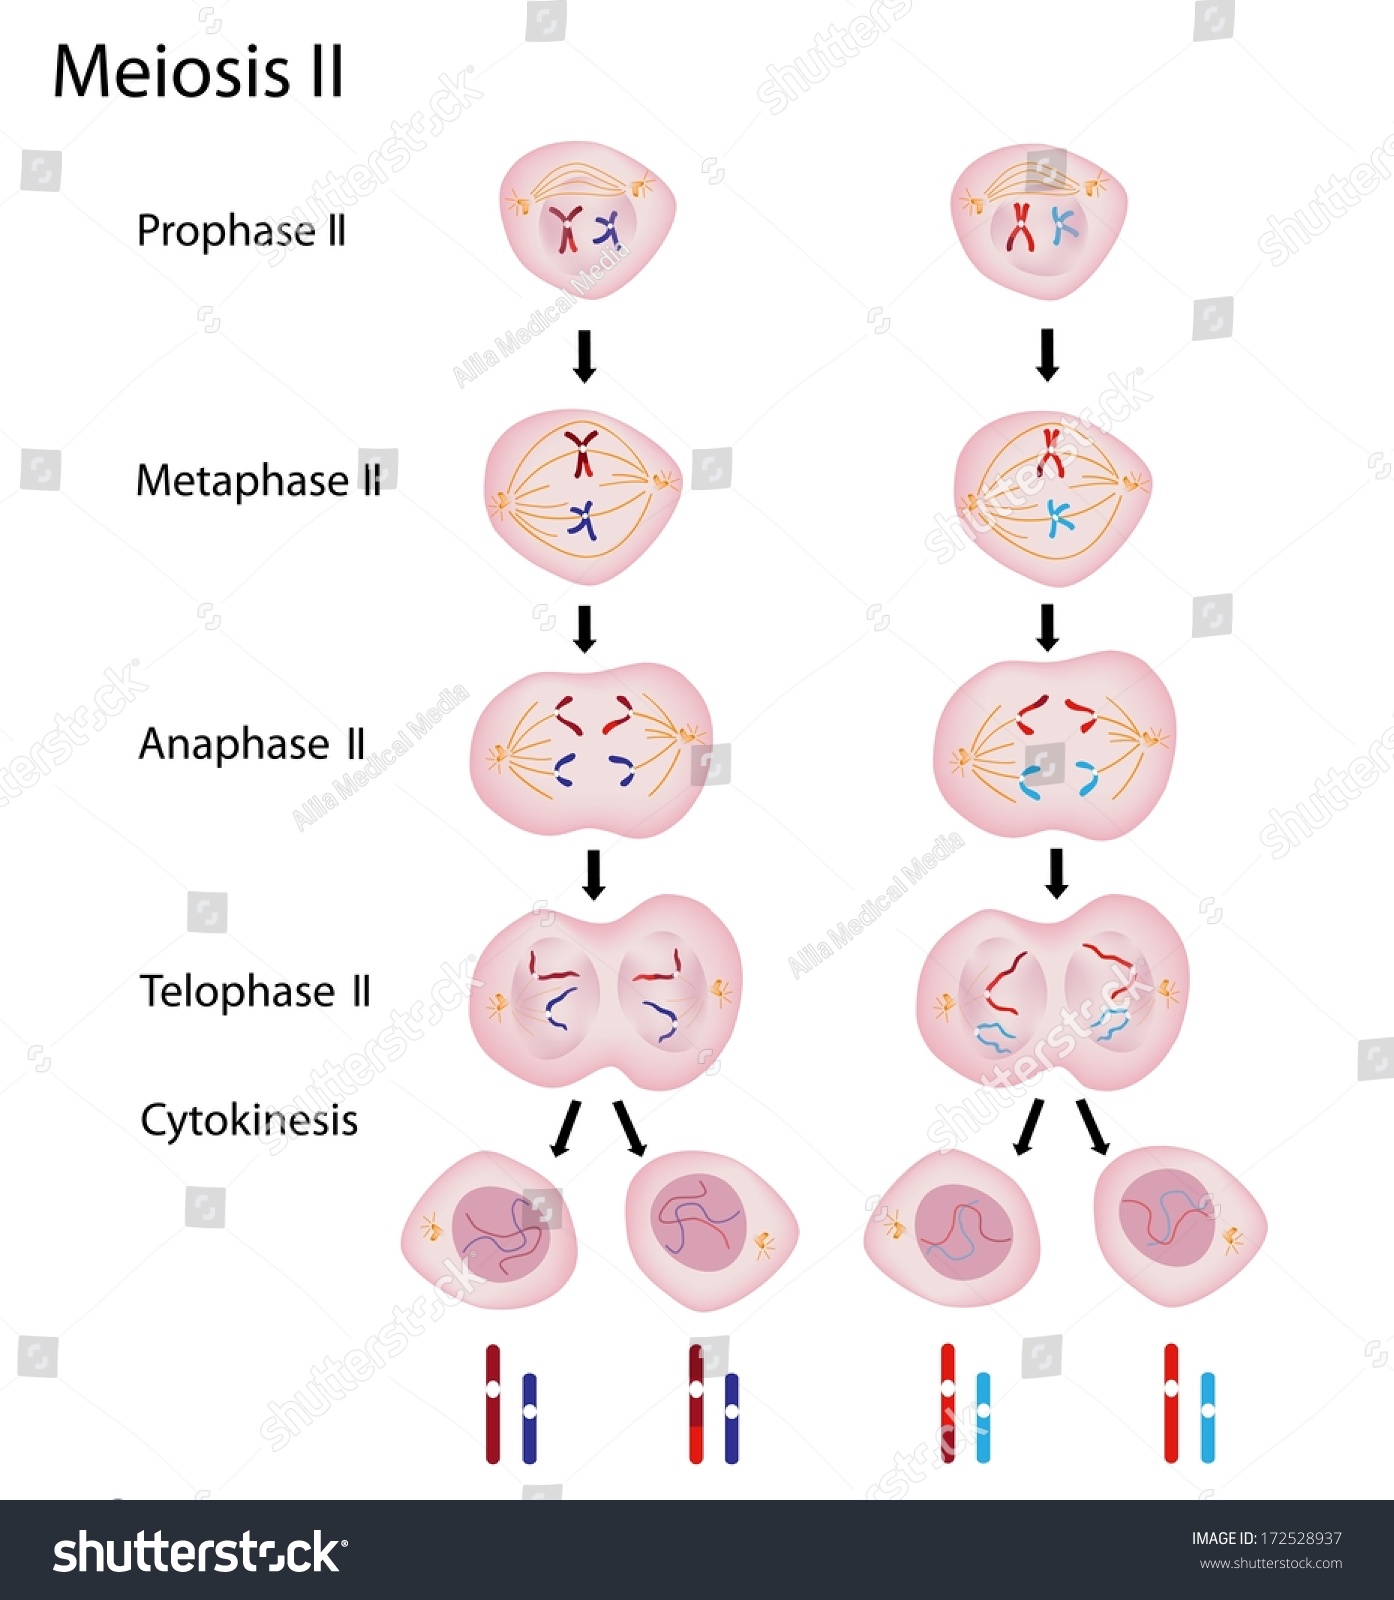 Phases Of Meiosis 2 Stock Photo 172528937 : Shutterstock